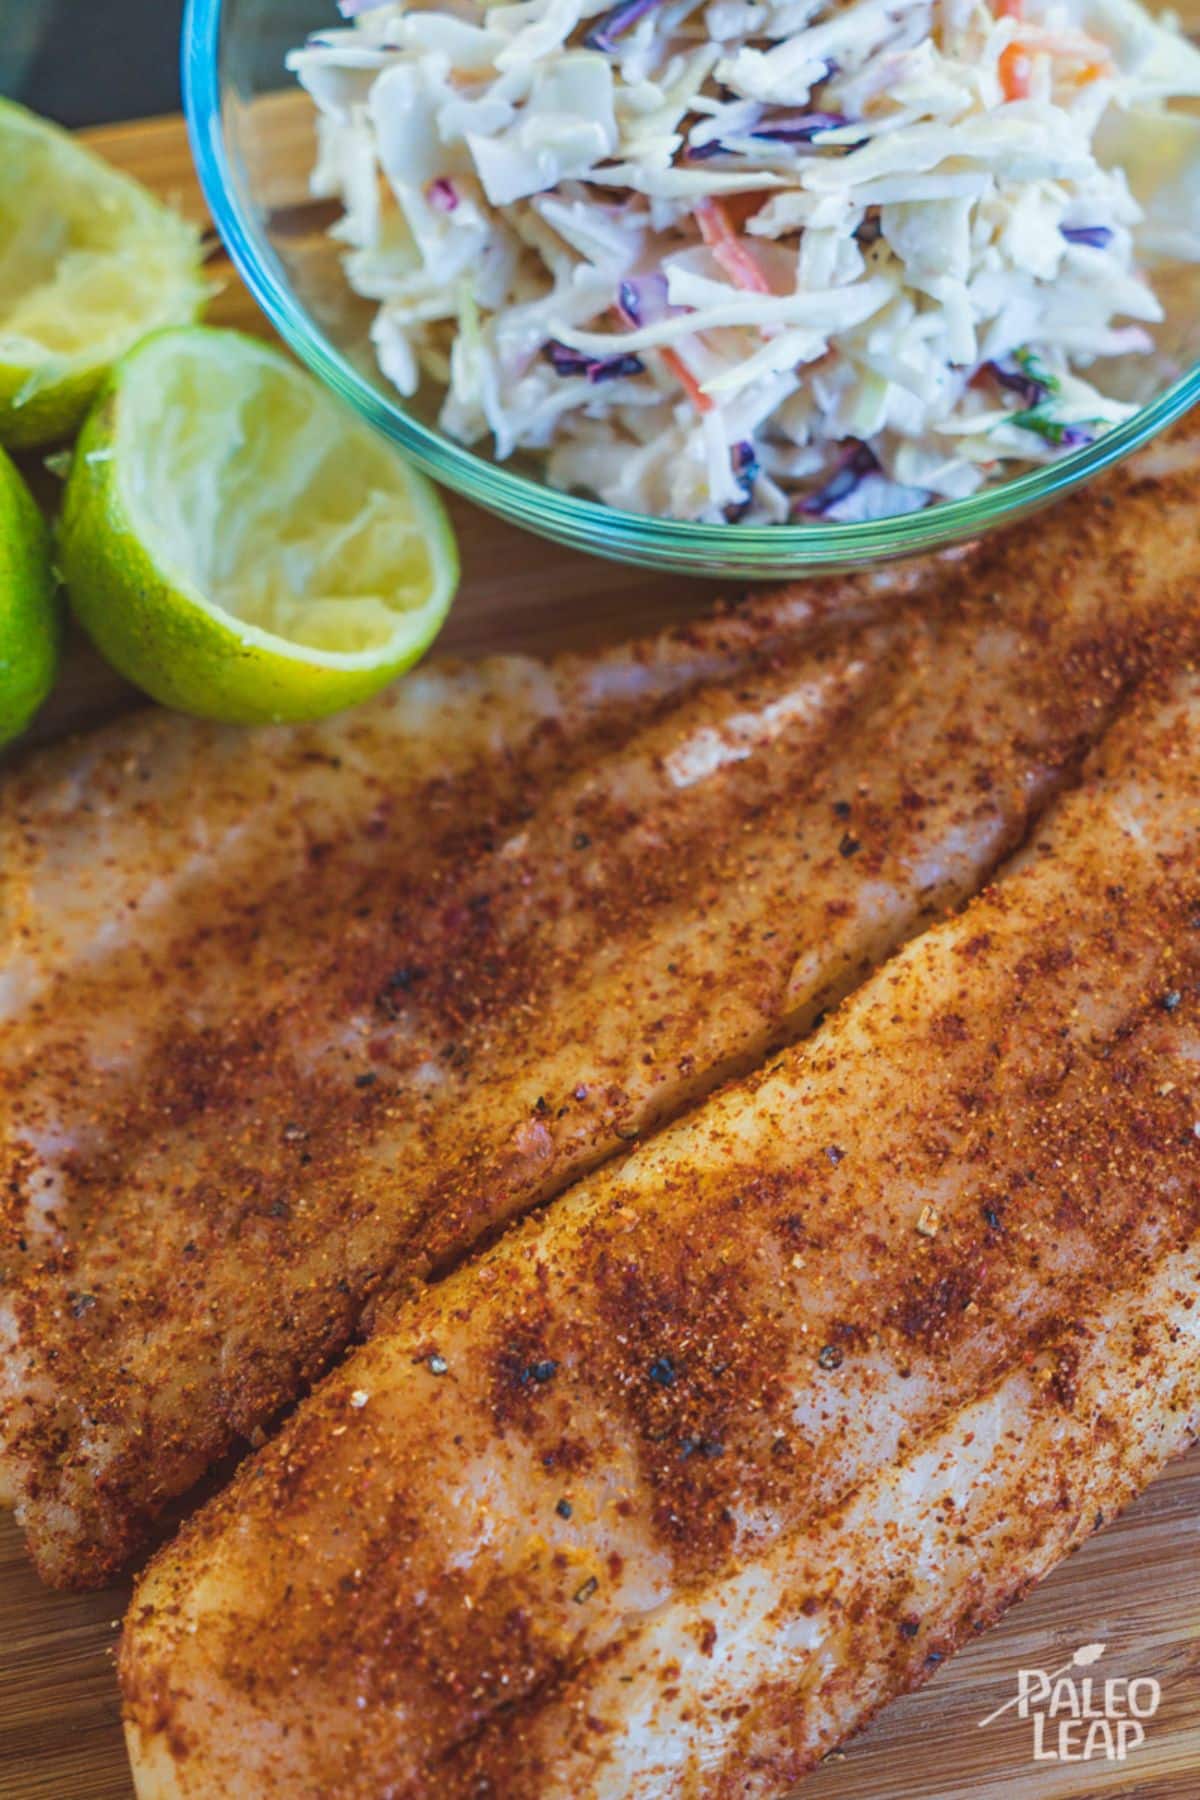 Spicy Fish With Cabbage Slaw preparation.